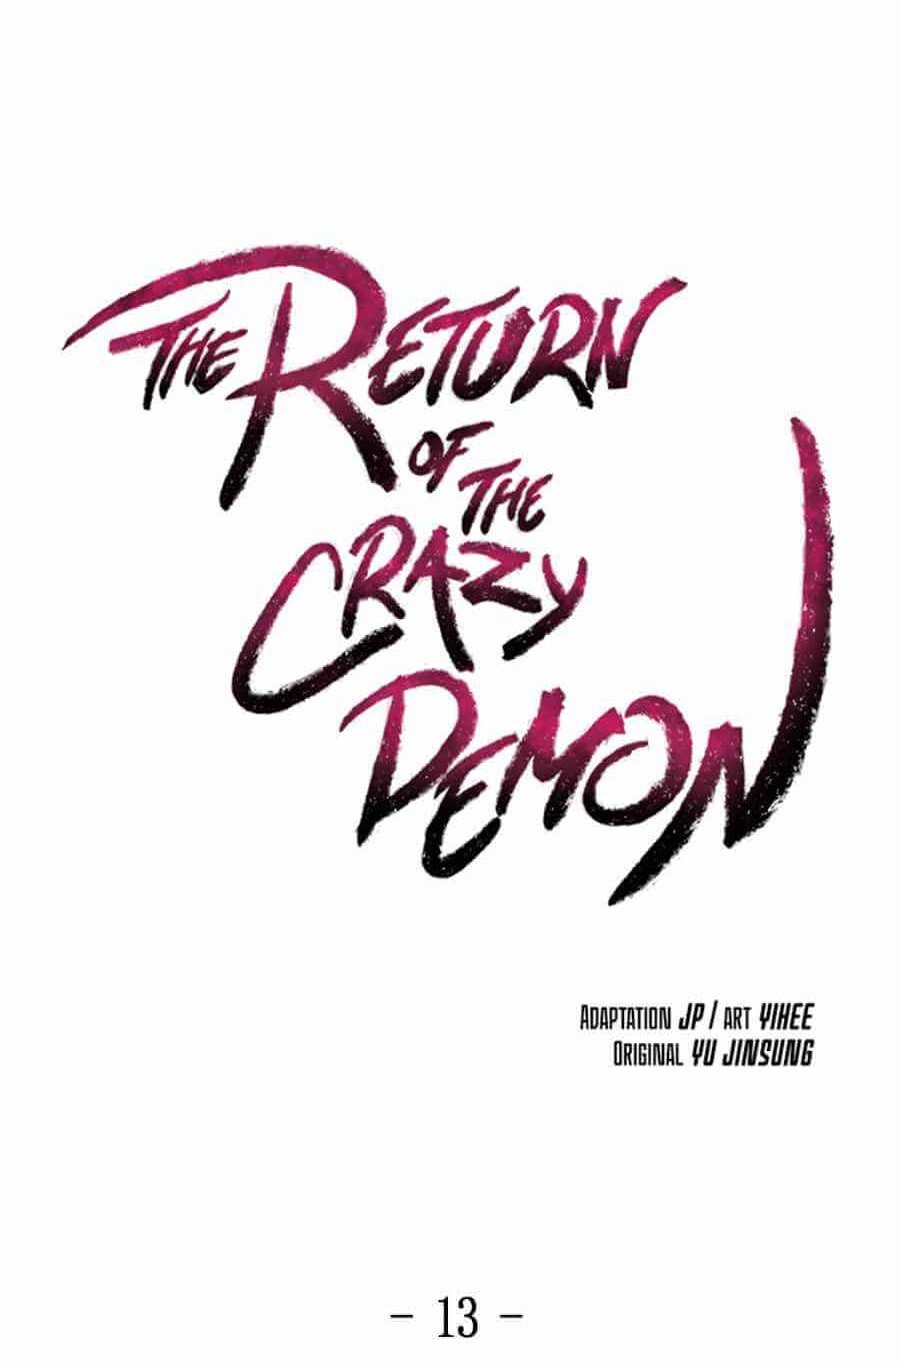 The Return of the Crazy Demon 13 19